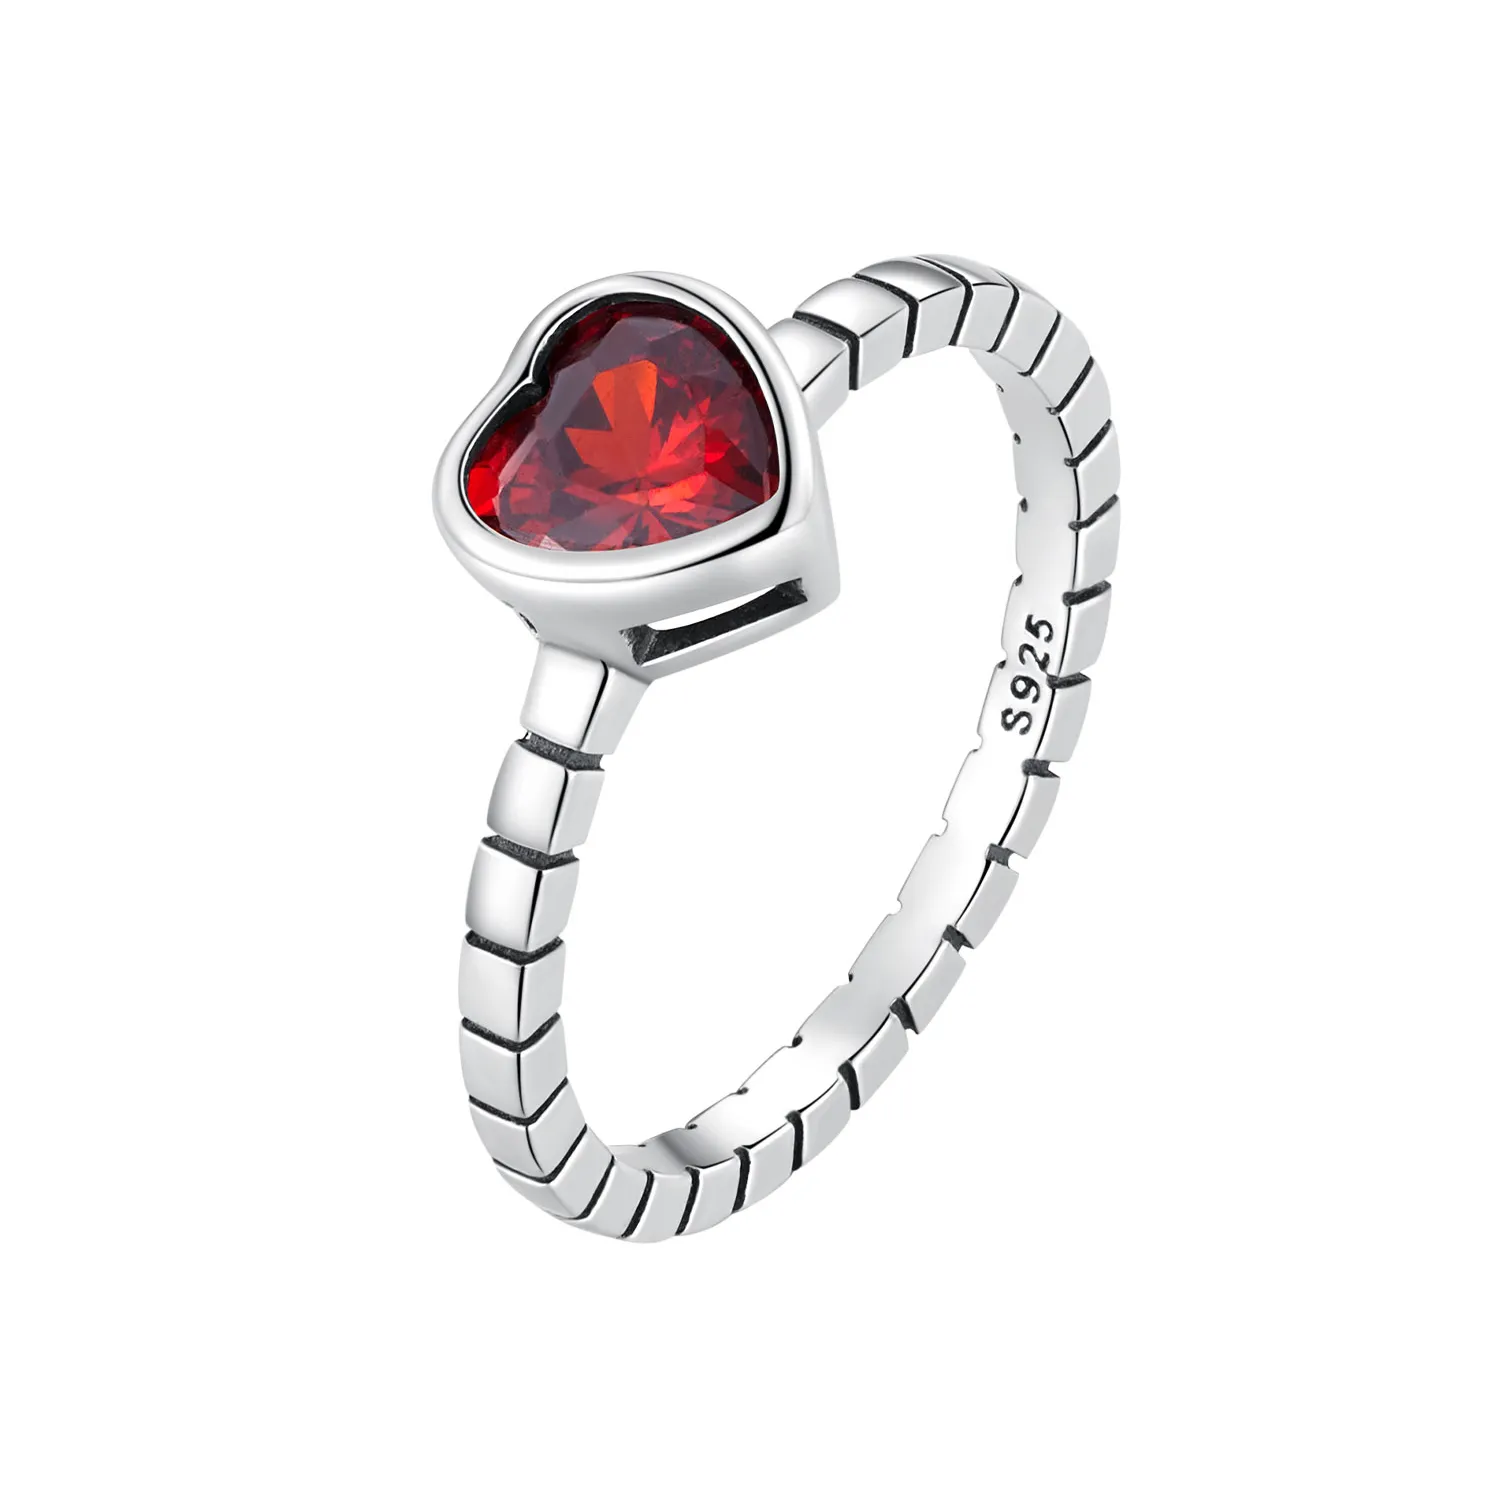 Pandora Style Elevated Heart Ring - SCR950